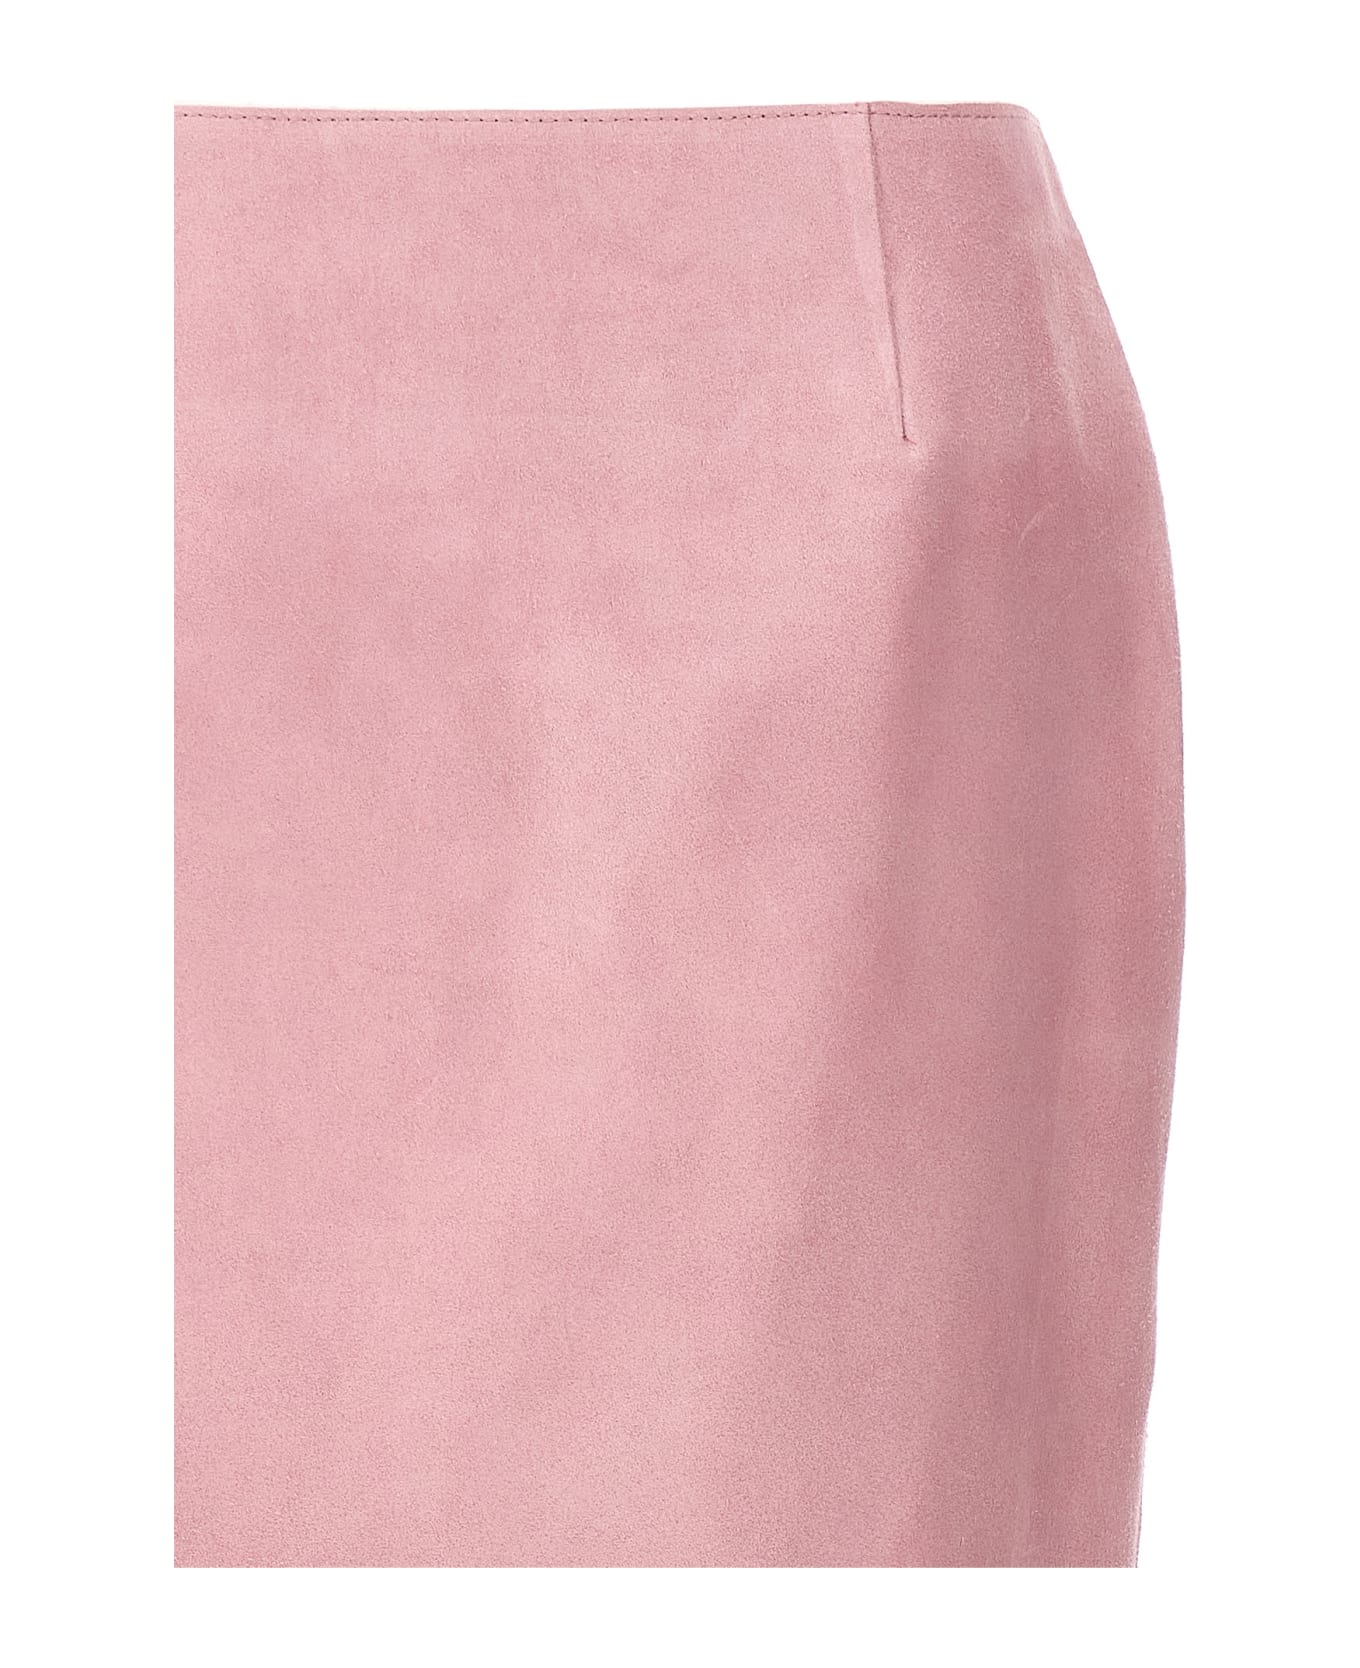 Marni Suede Maxi Skirt - Pink